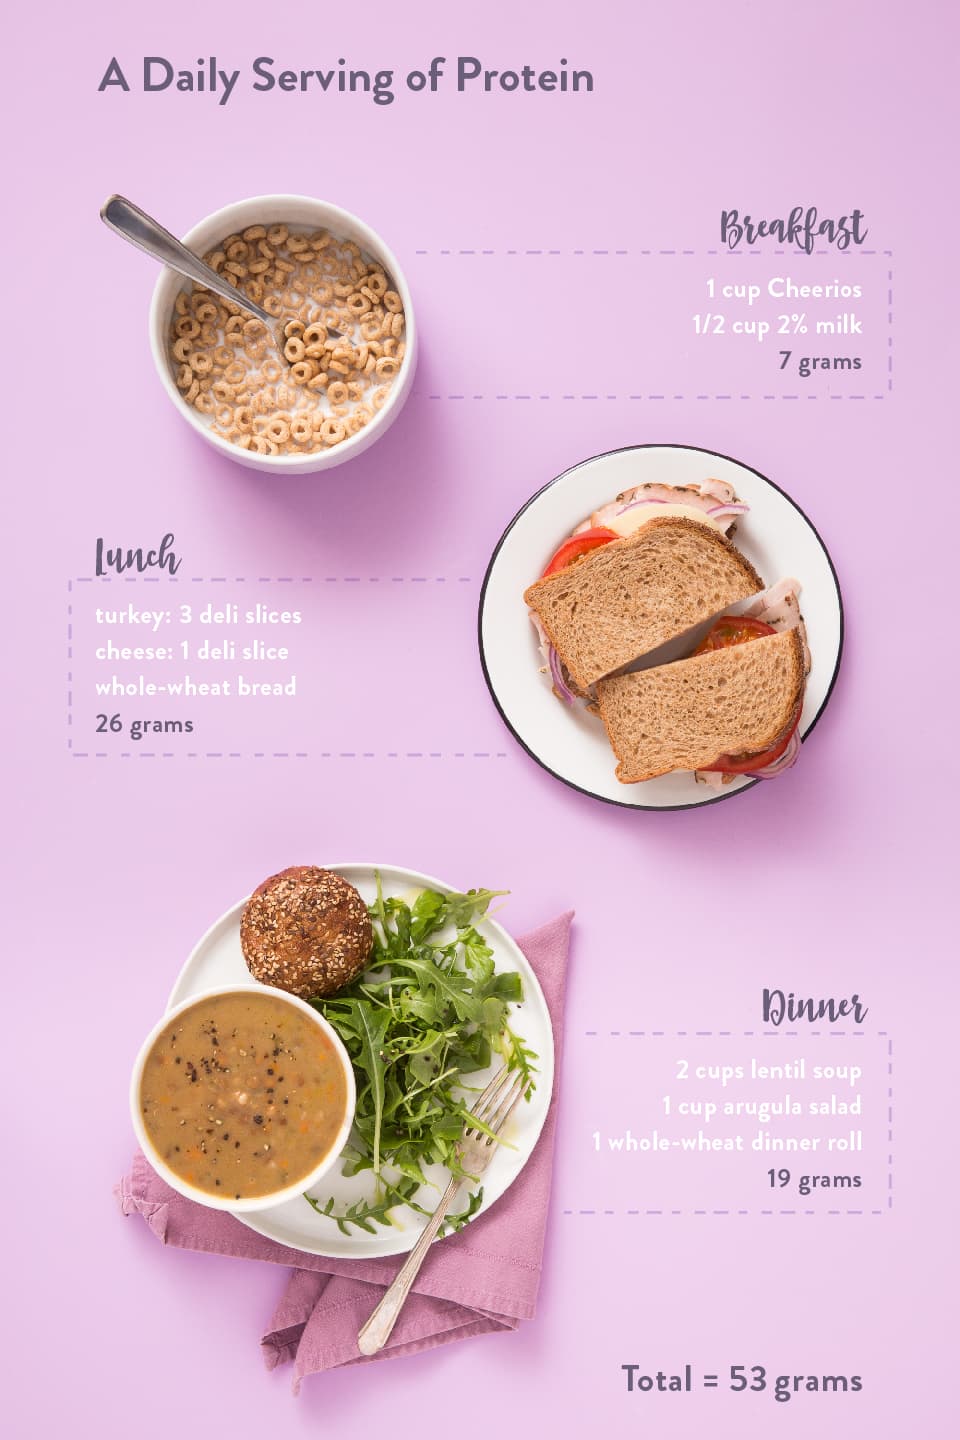 10 Ways to Eat Your Daily Protein